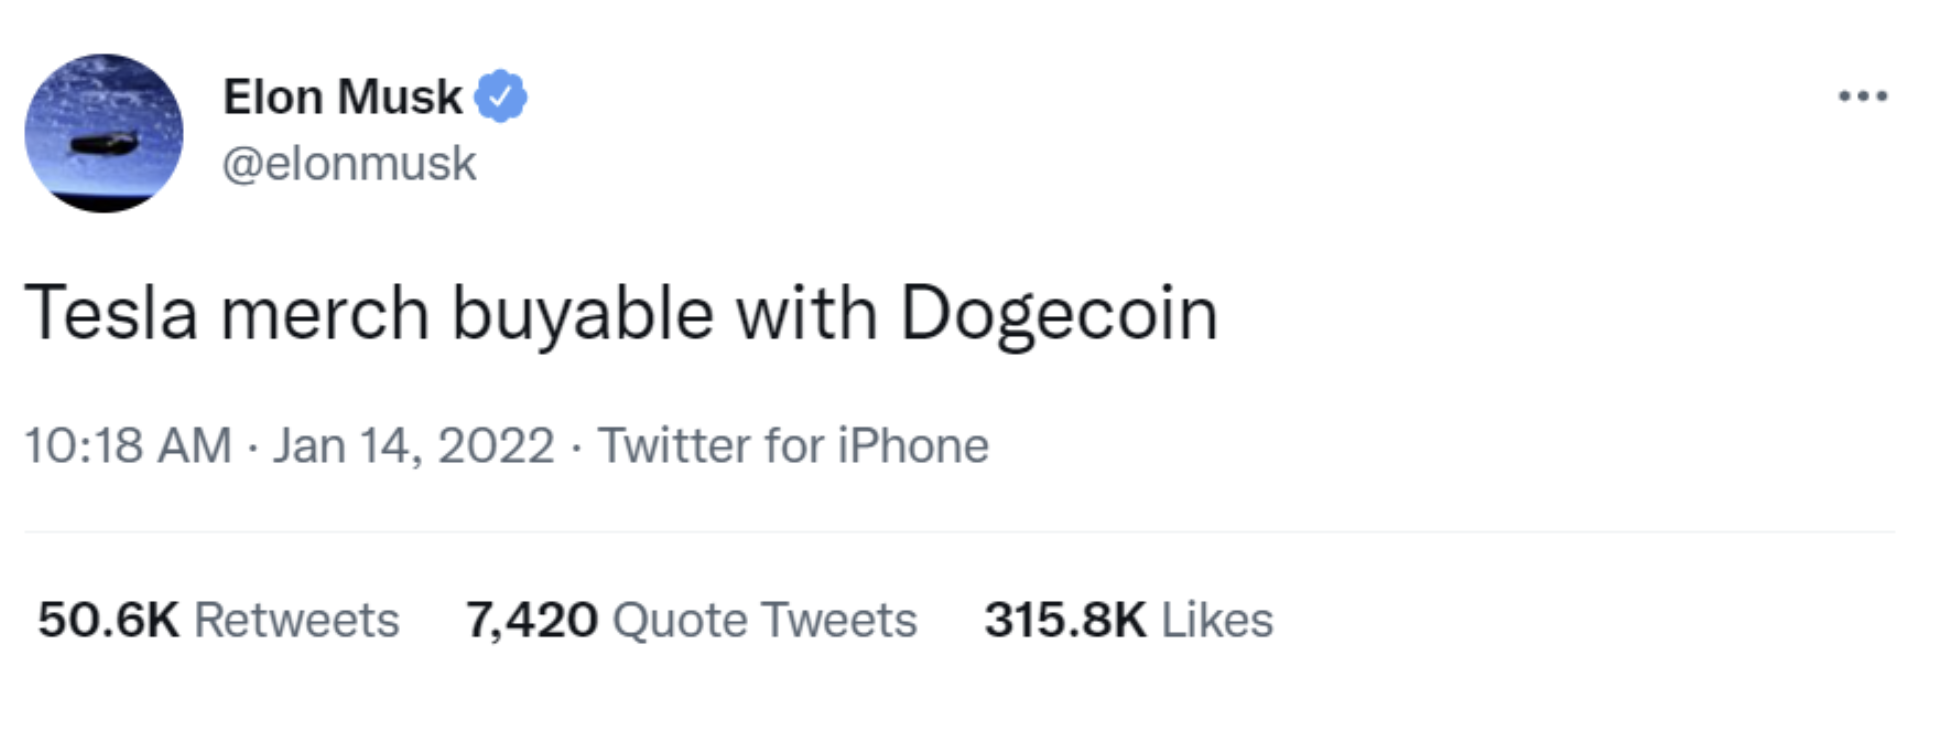 Elon musk's tweet announcing Tesla merchandise can be bought with dogecoin